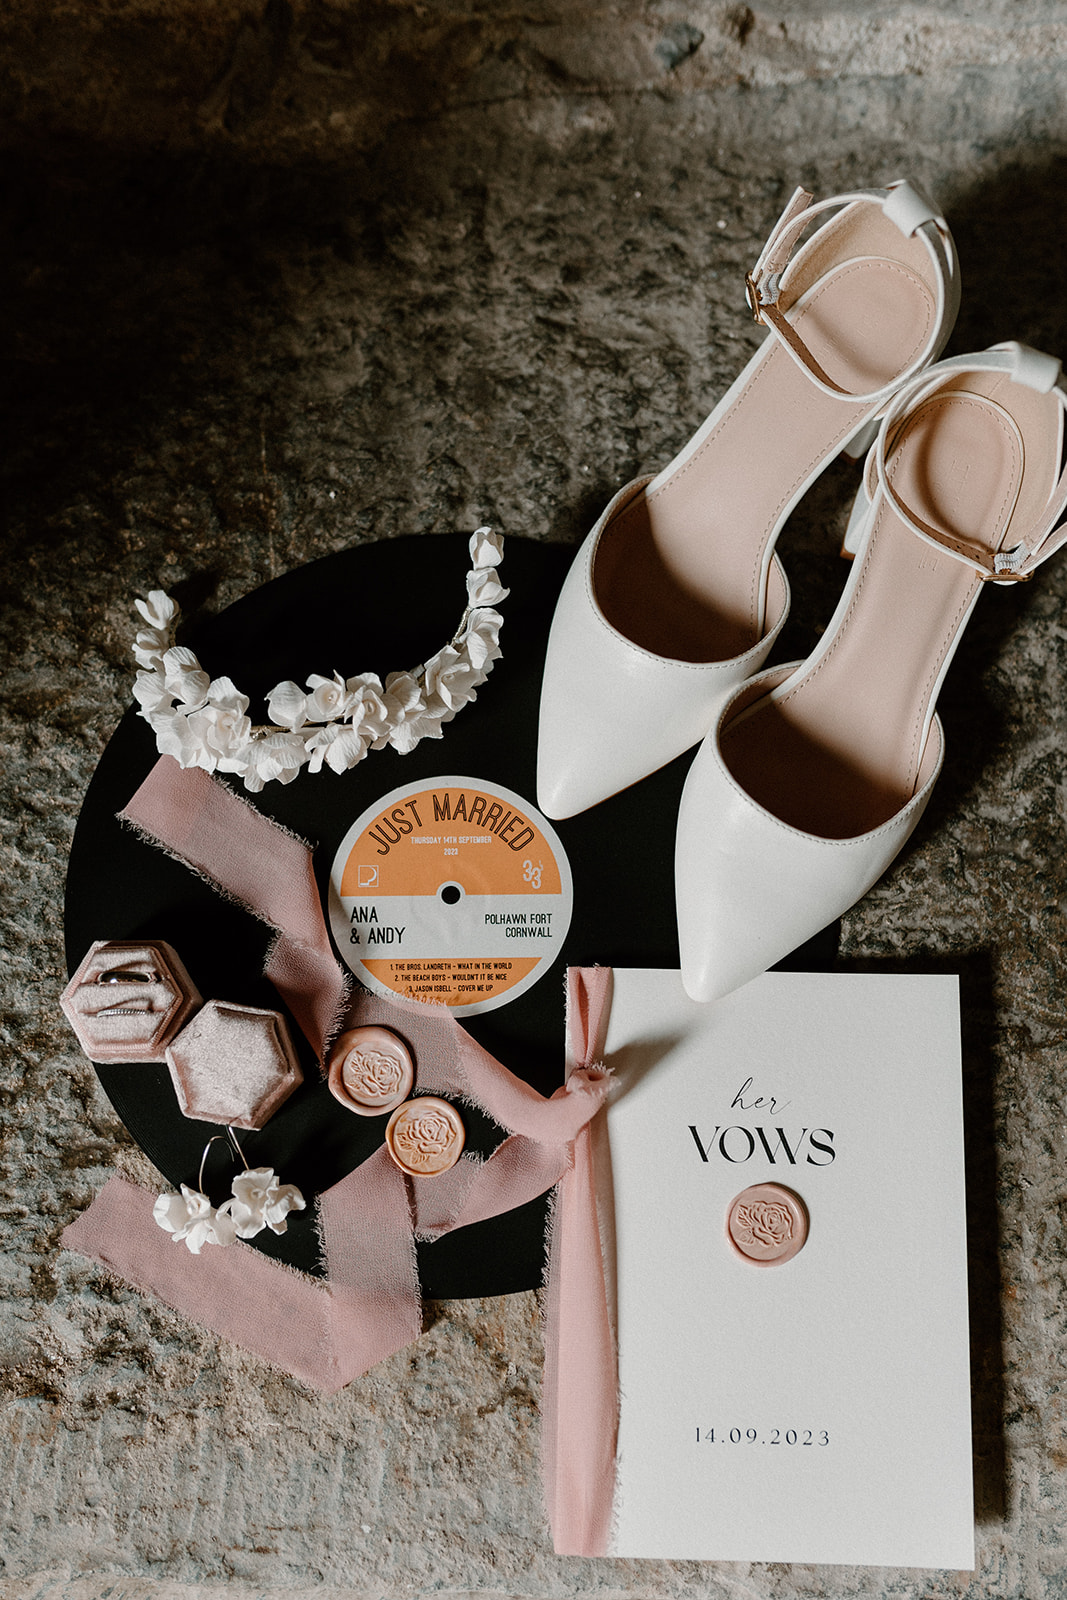 Flat lay of bridal details including shoes, wedding vows and vinyl record.